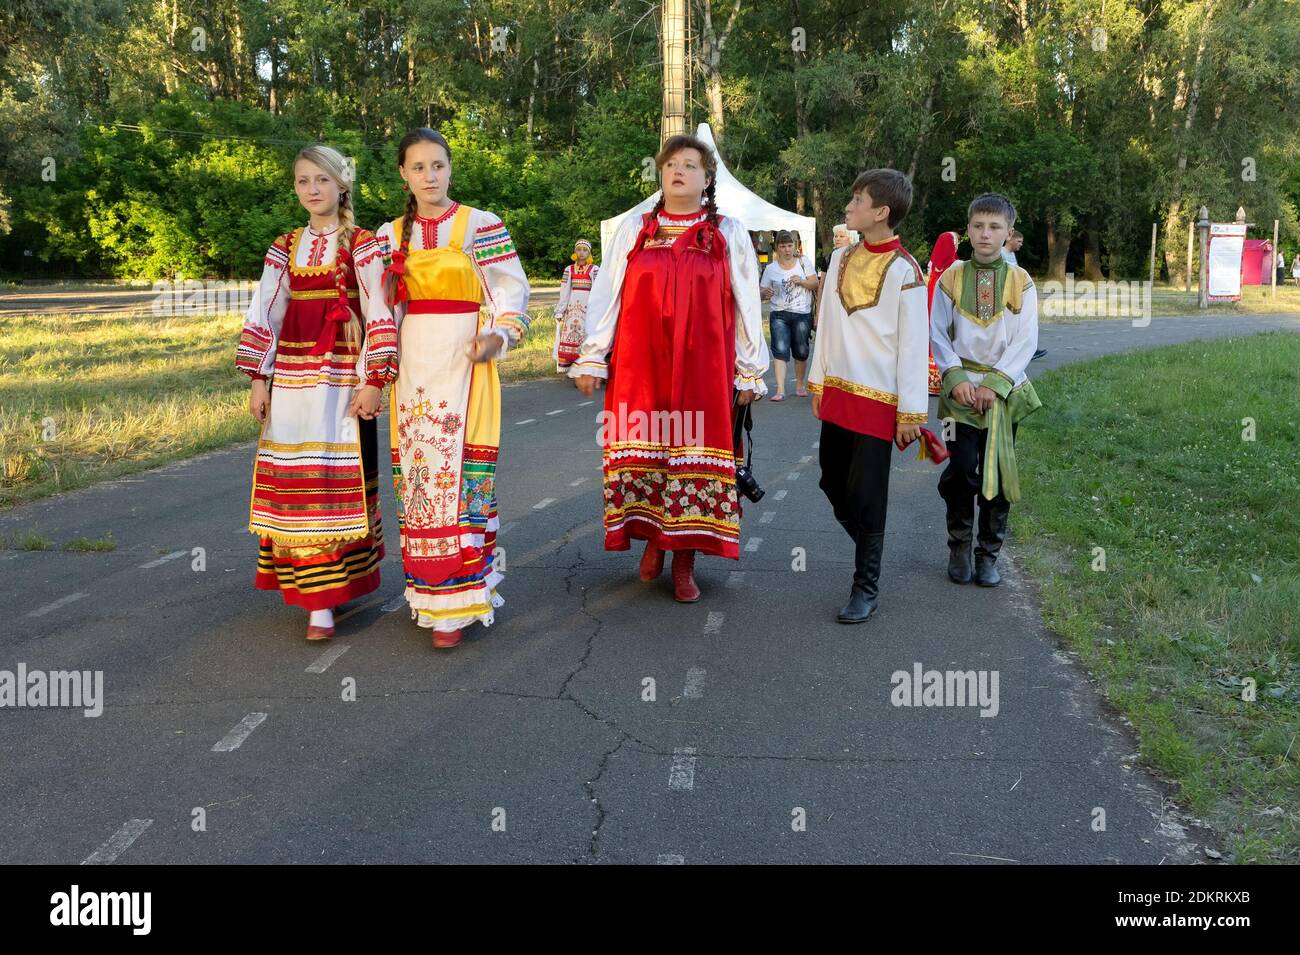 Company of young people in Russian folk costumes is walking along the path during the annual Intl festival of music and crafts World of Siberia. Stock Photo